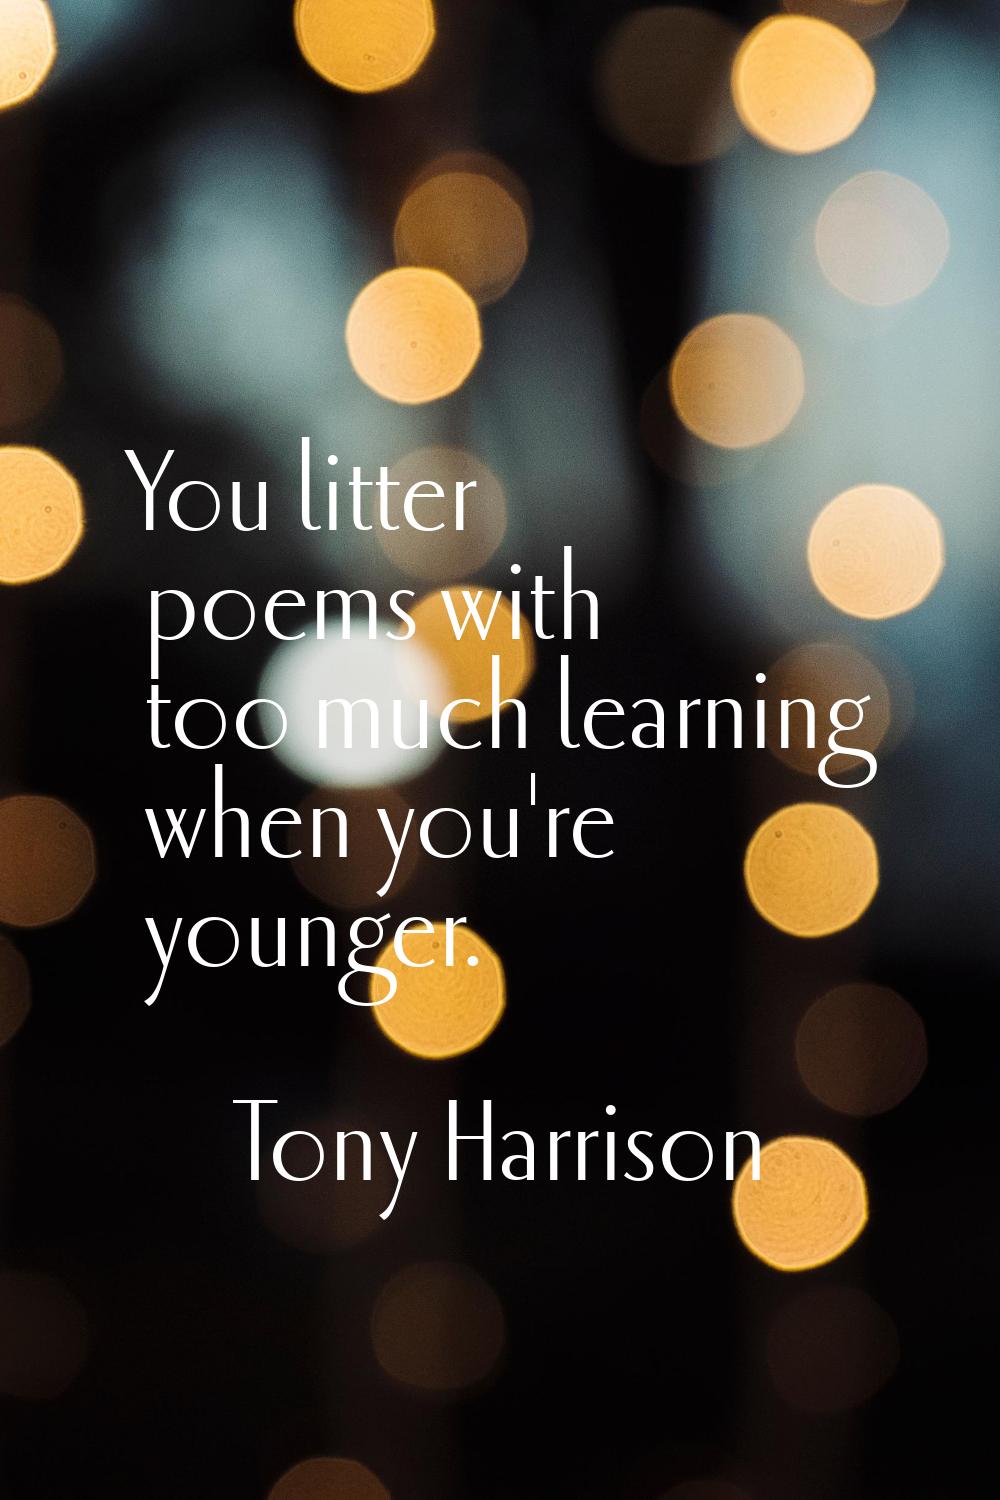 You litter poems with too much learning when you're younger.